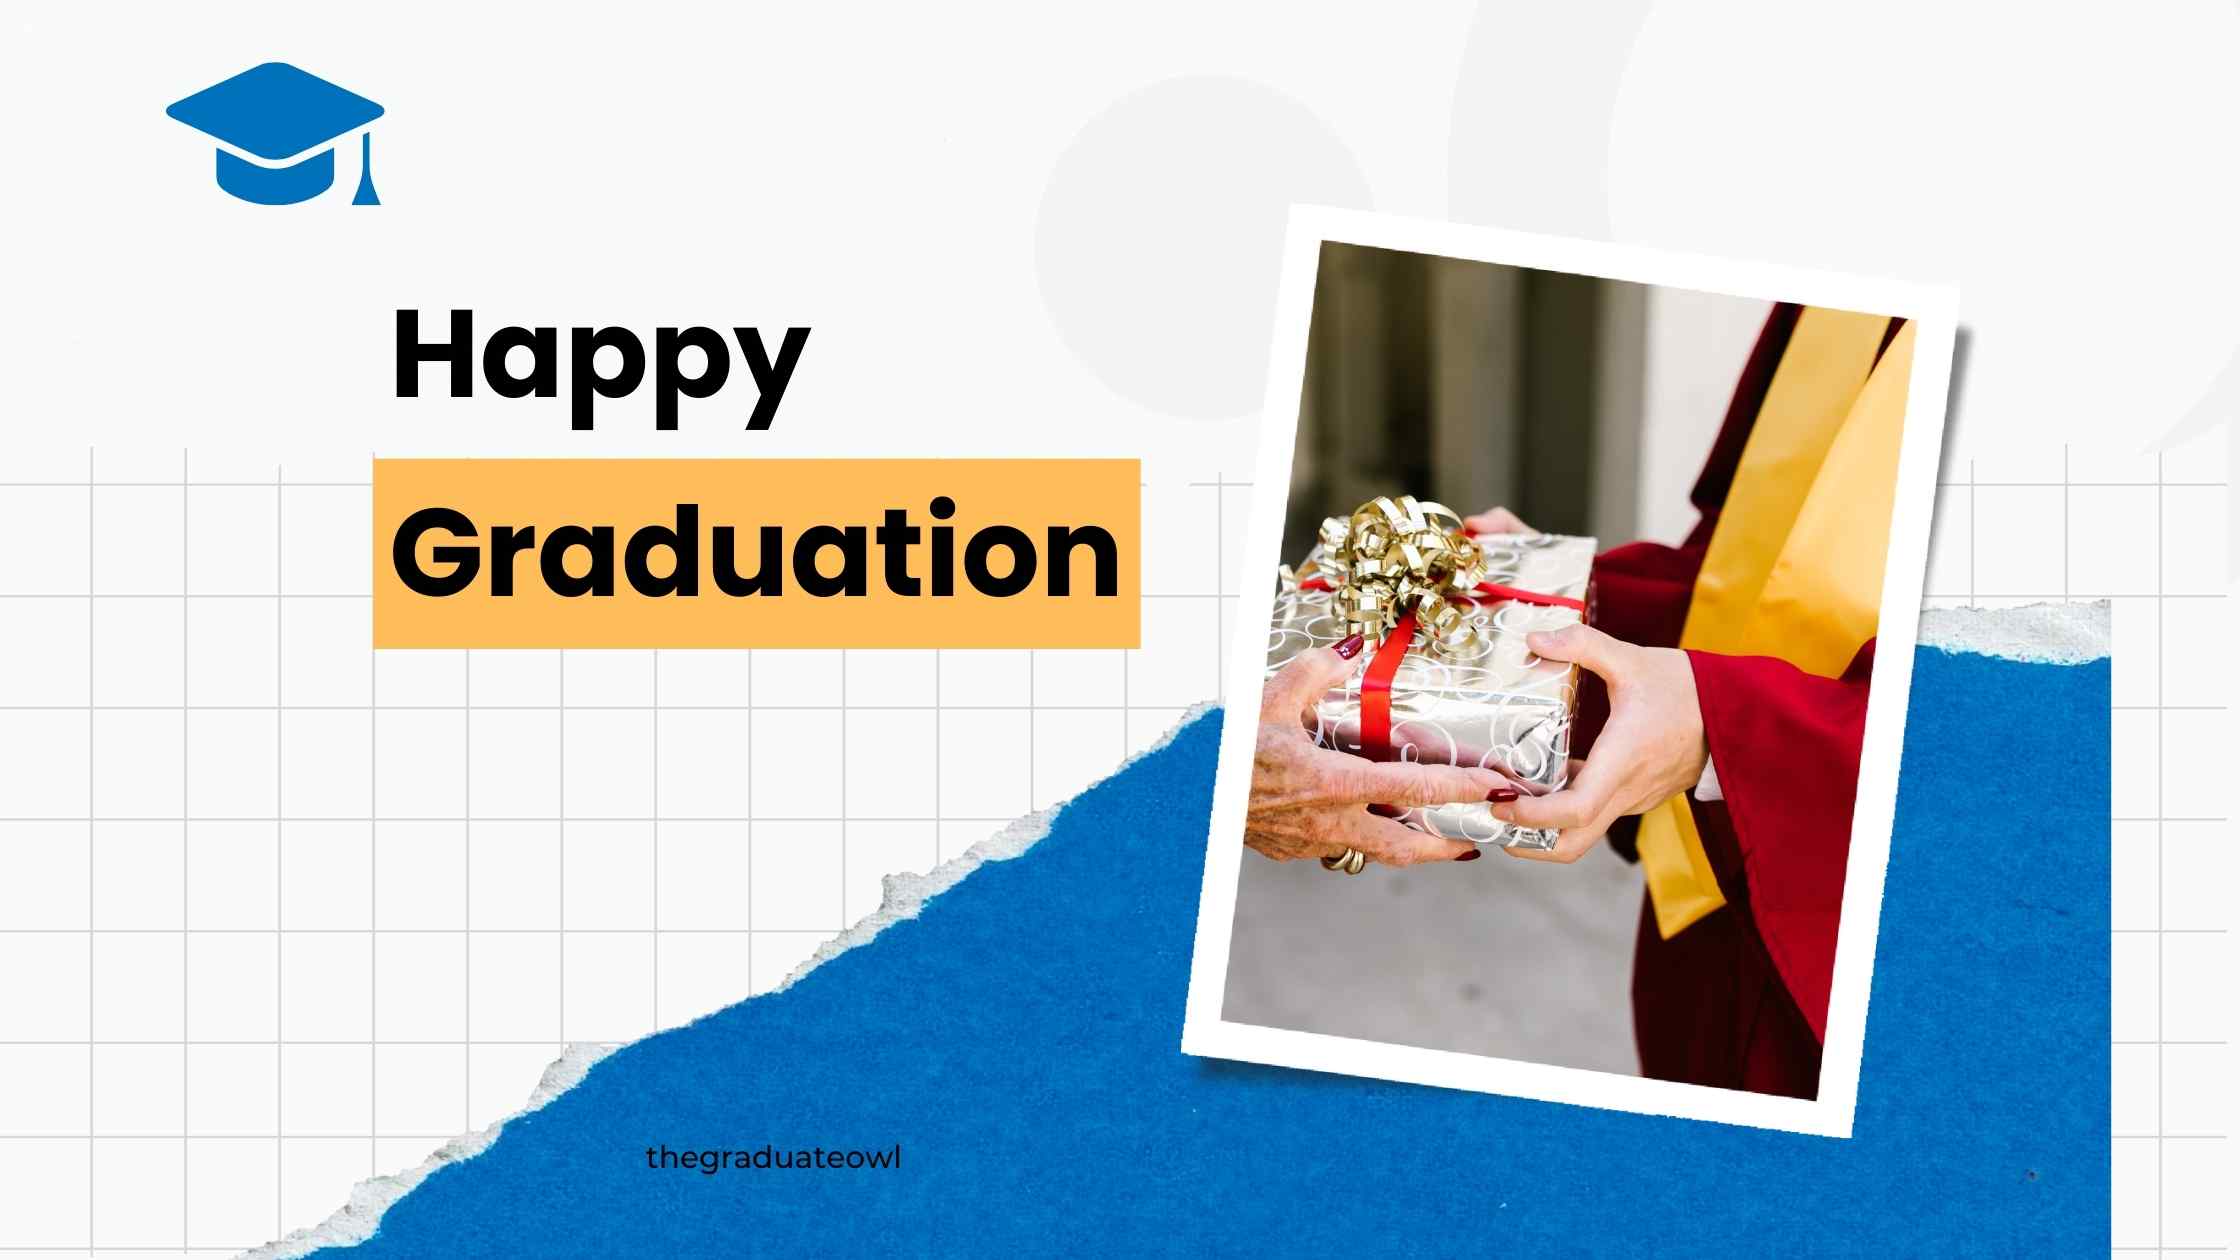 Choose the Perfect Graduation Gift